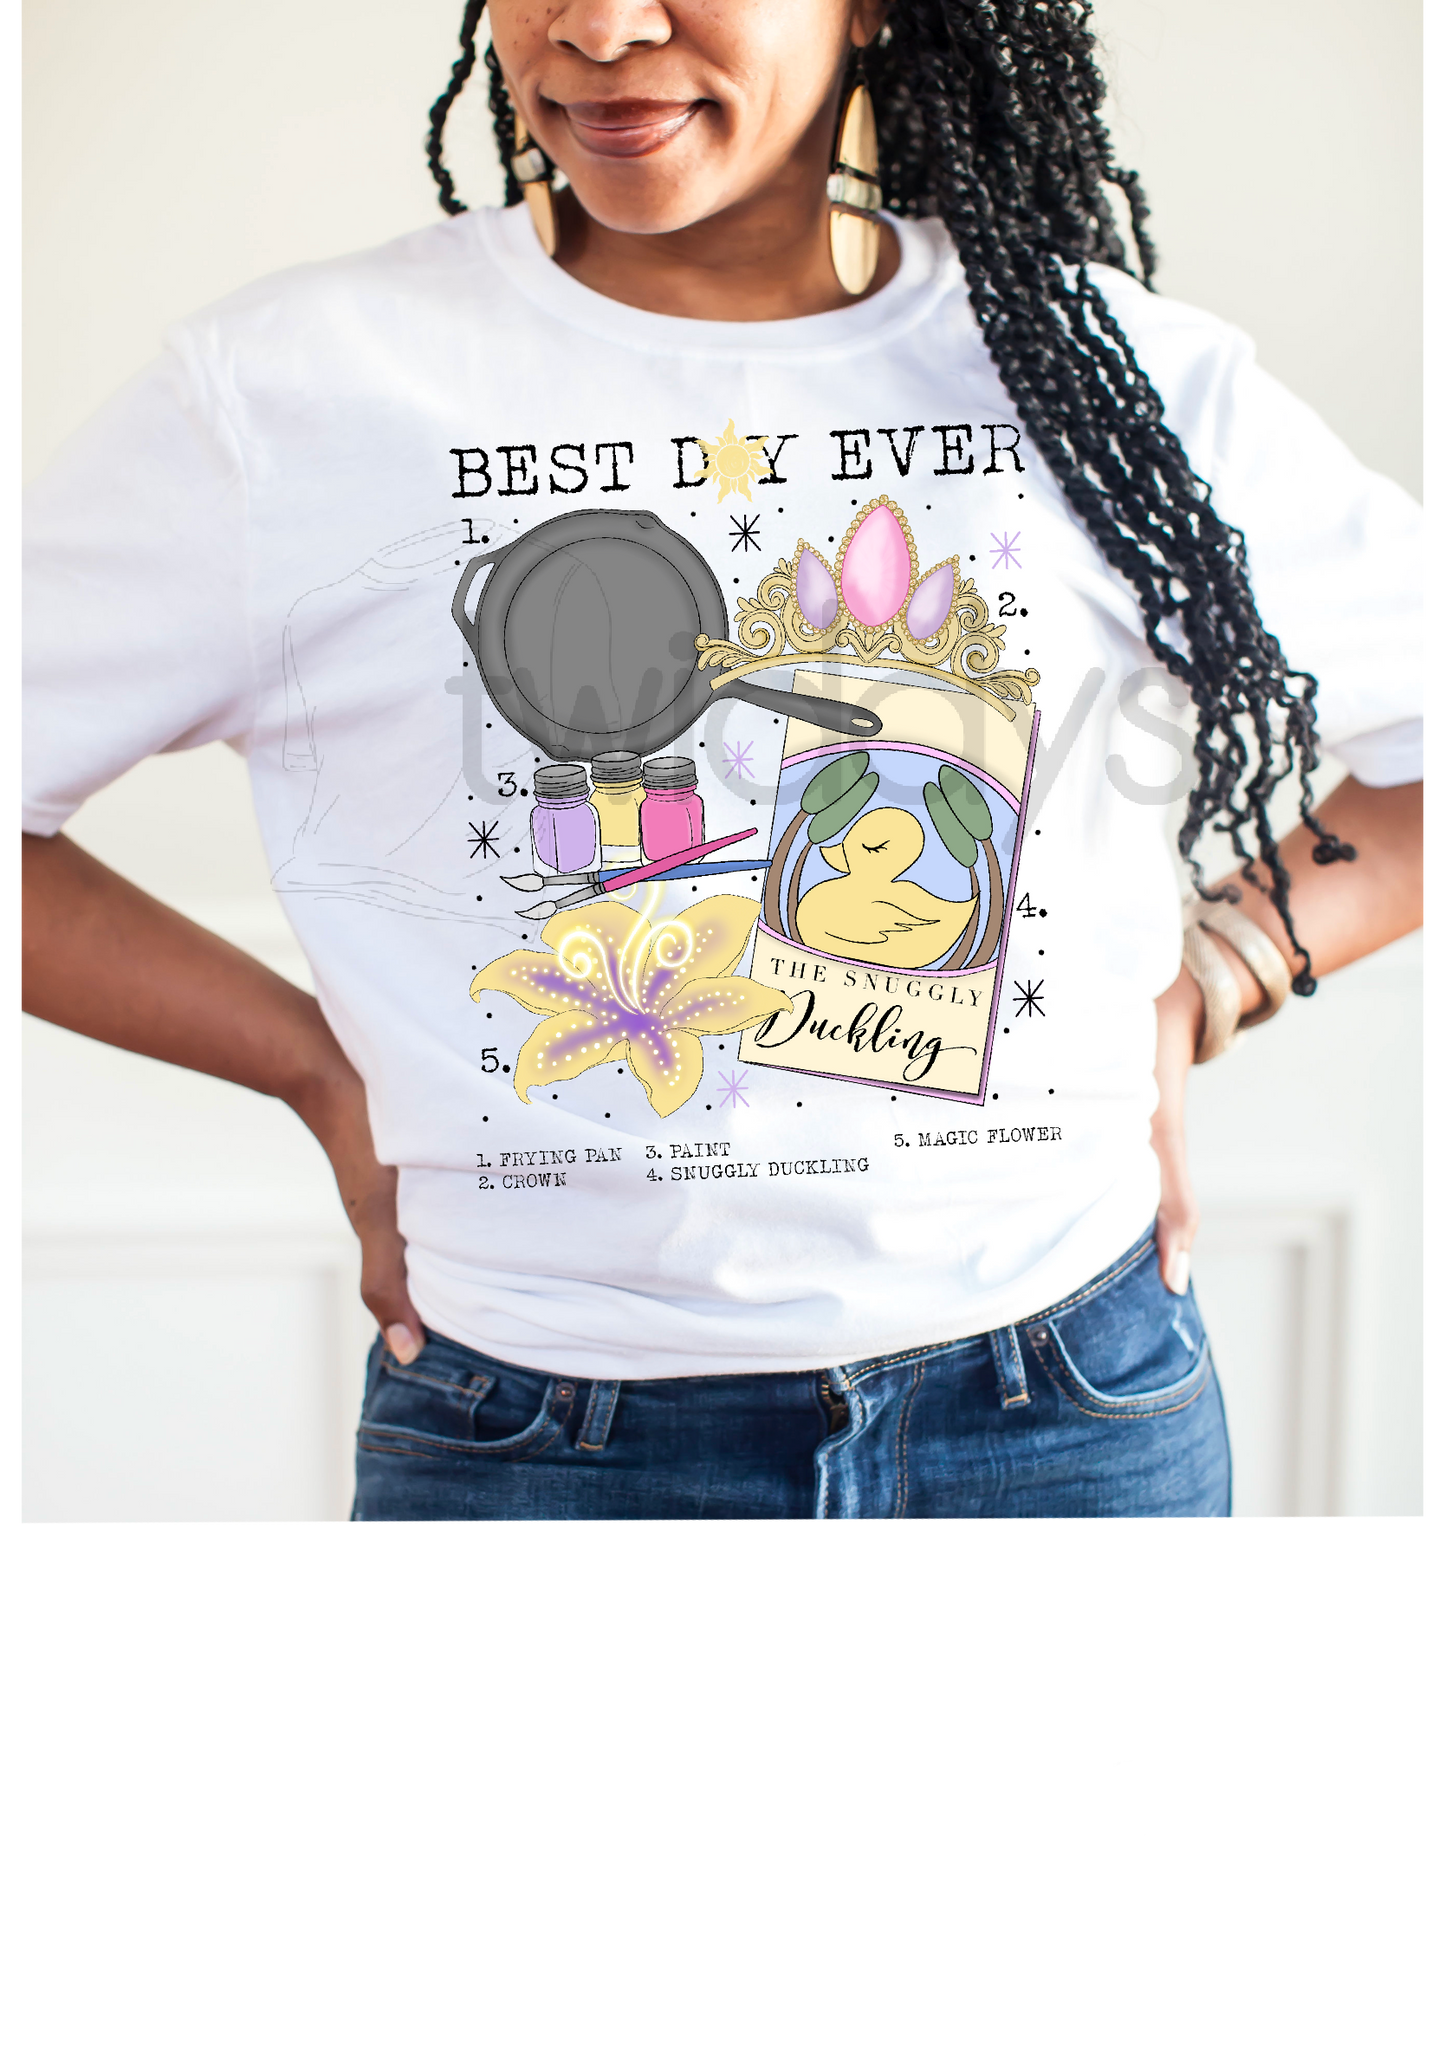 Best Day Ever Sublimation Shirt